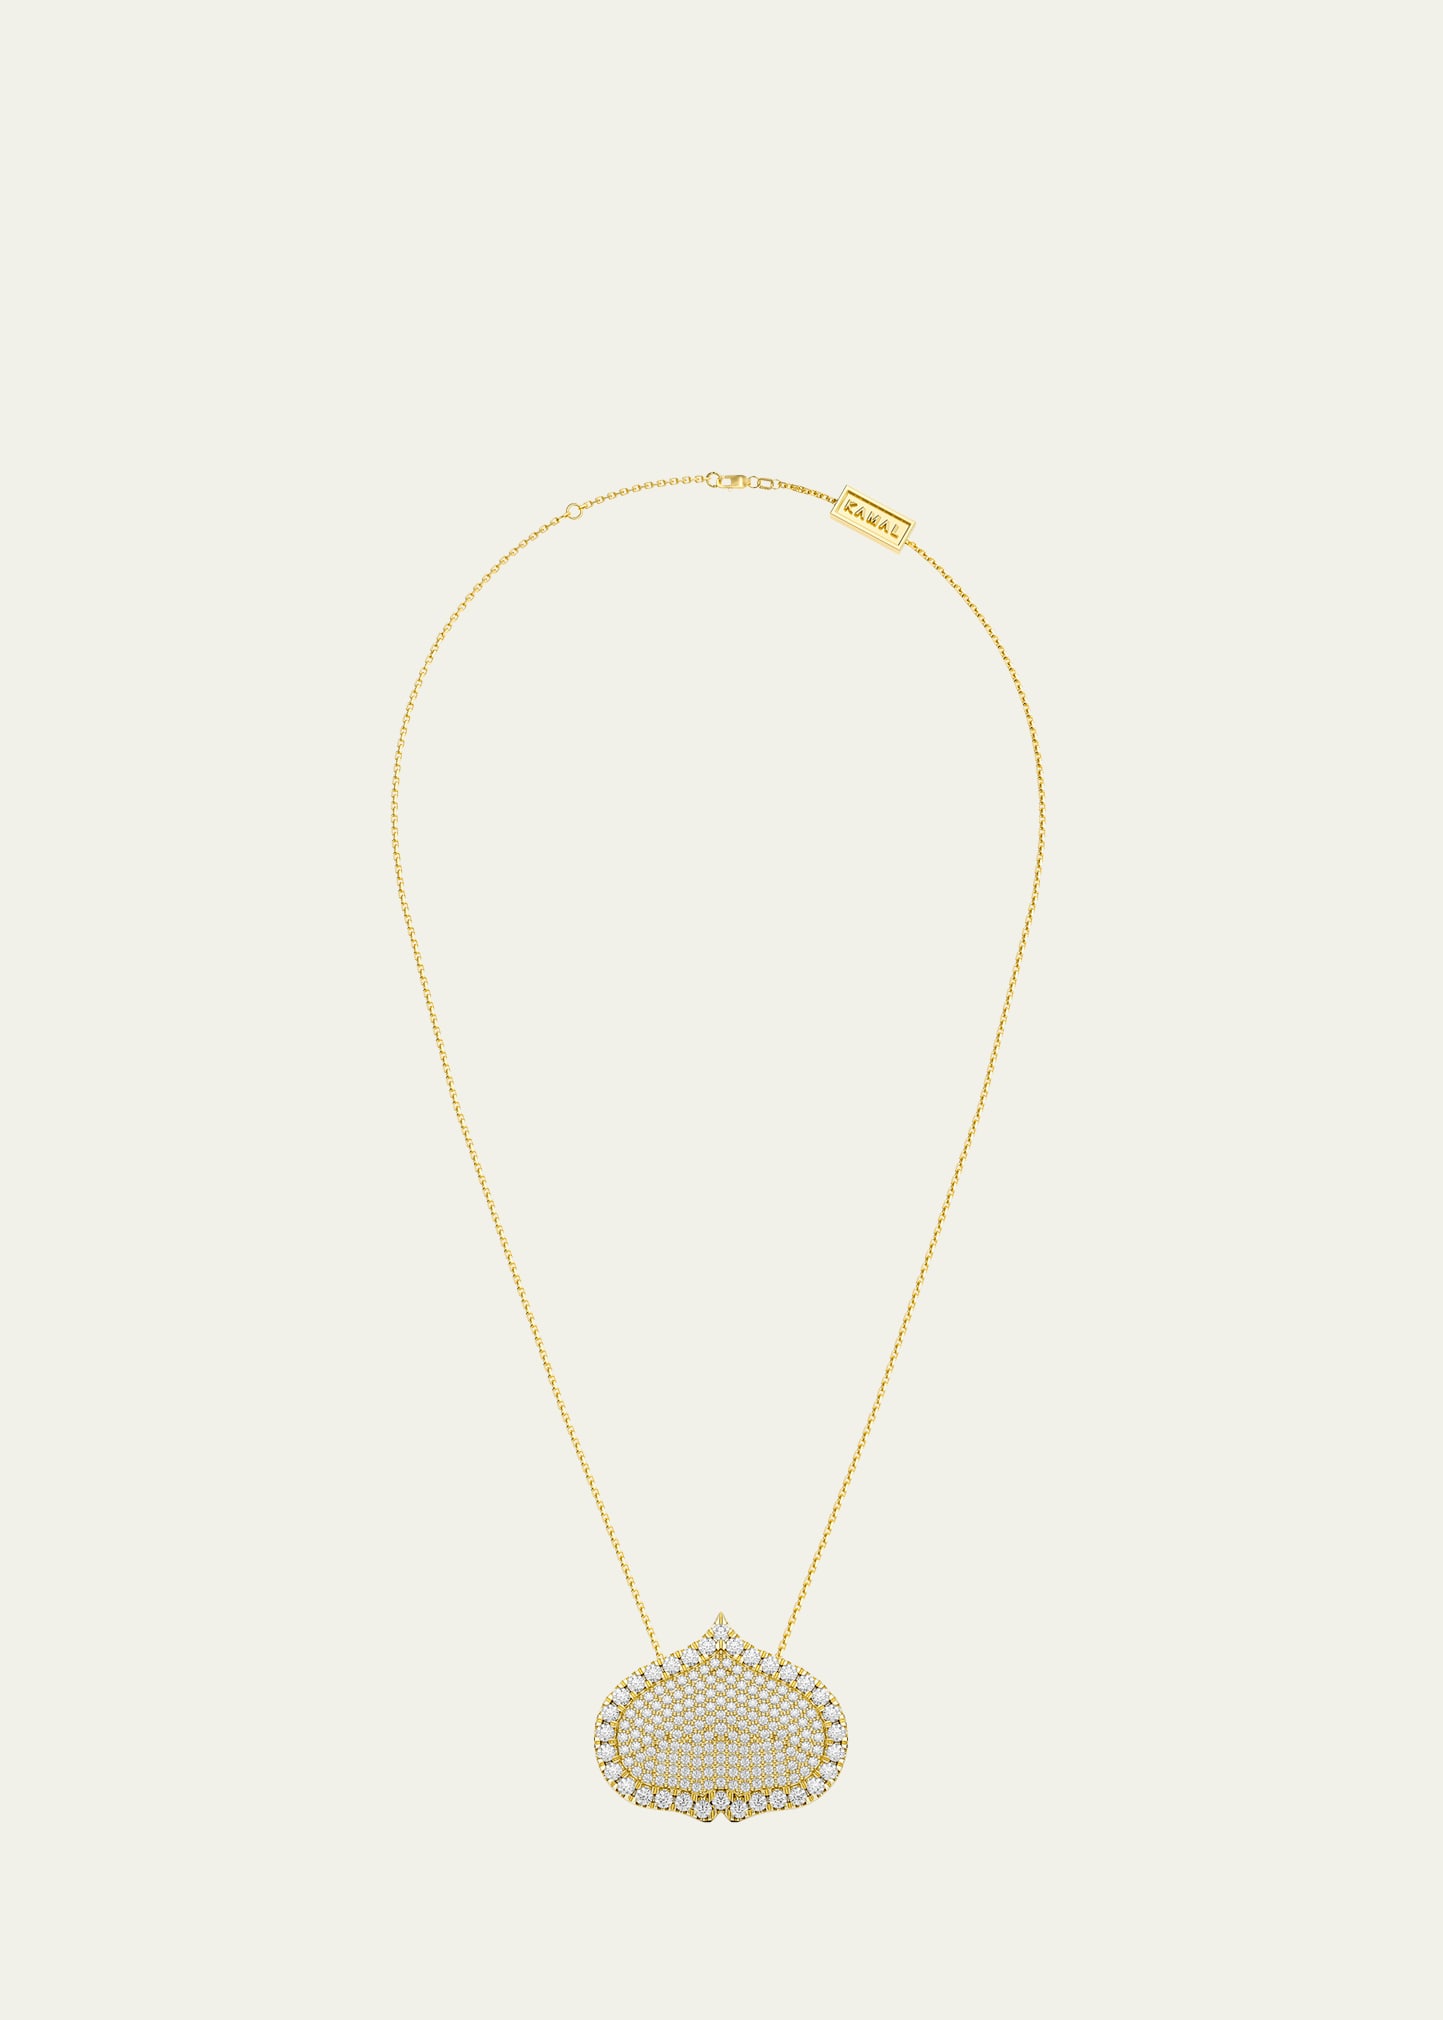 Eye Adore Necklace in Yellow Gold and Diamonds, 25mm